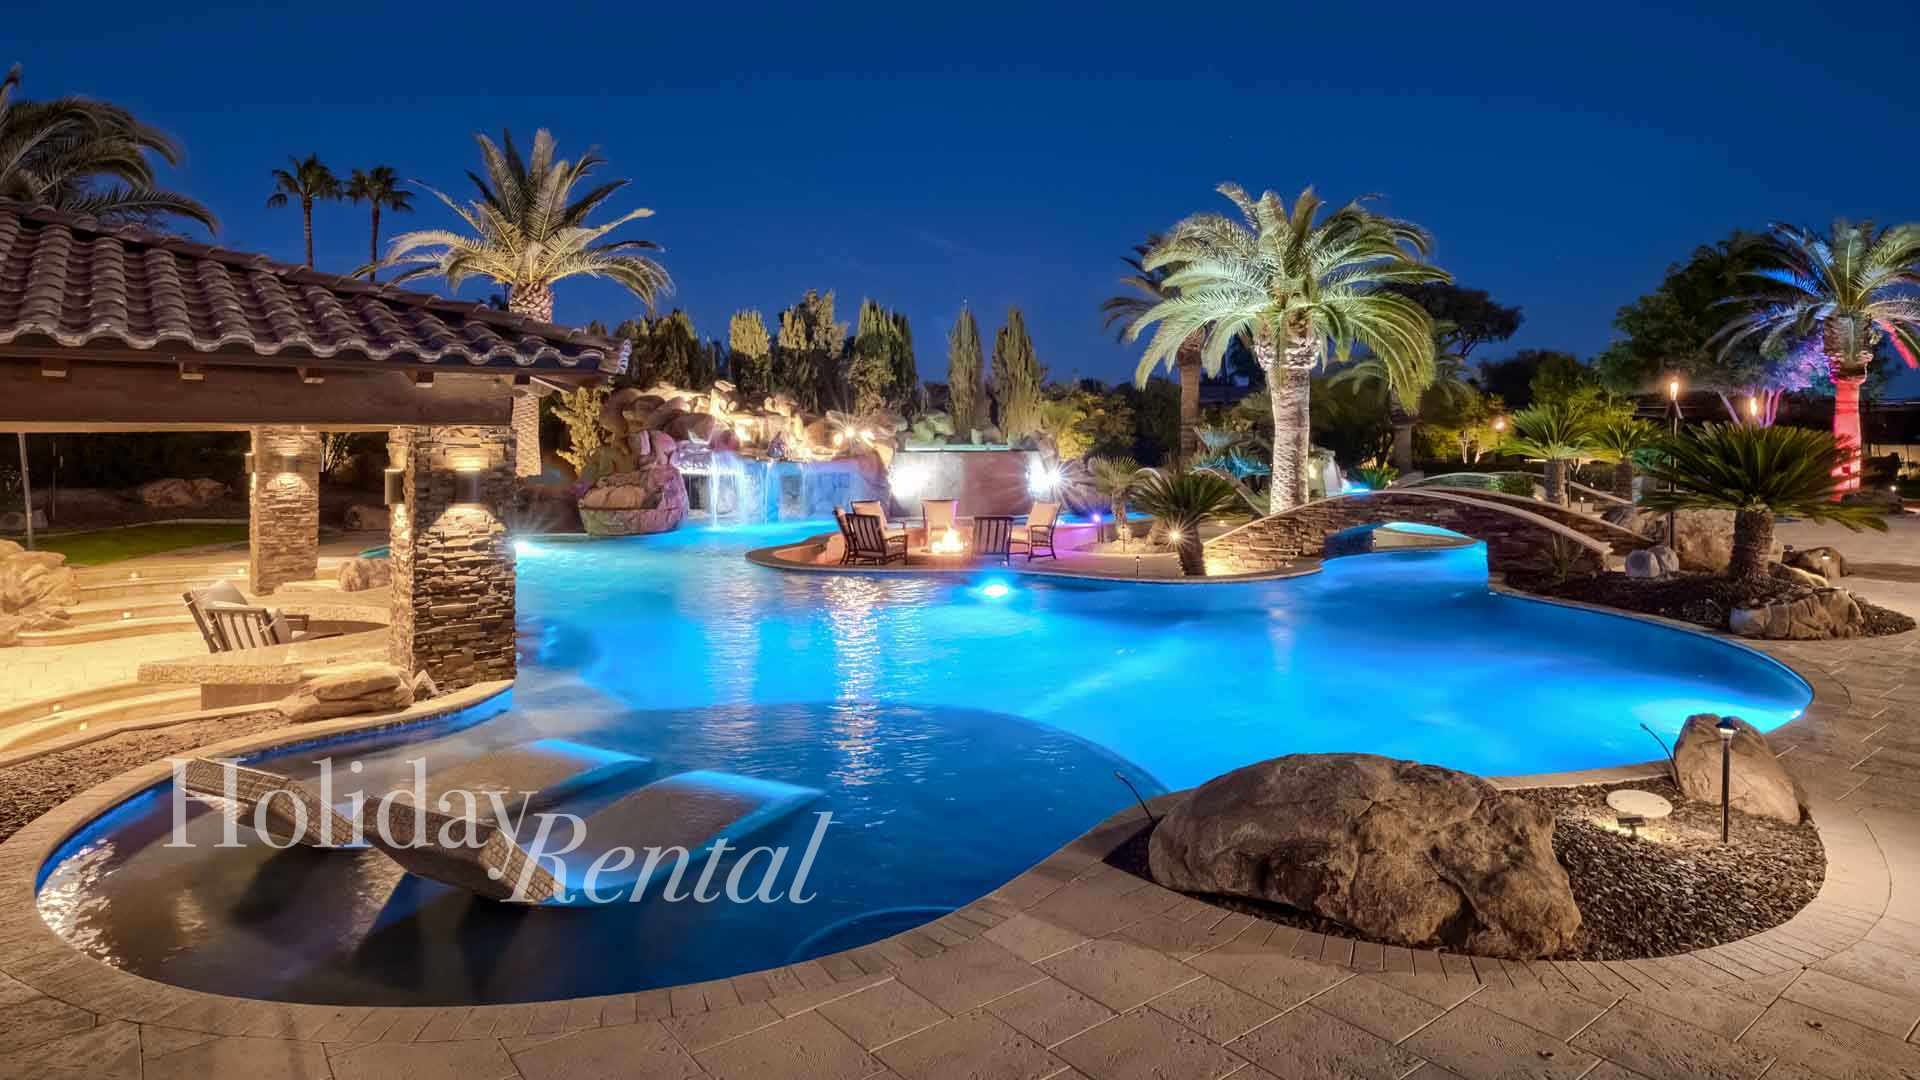 Take a dip in the pool and float along the lazy river, stopping to relax in the built-in lounge chairs along the way